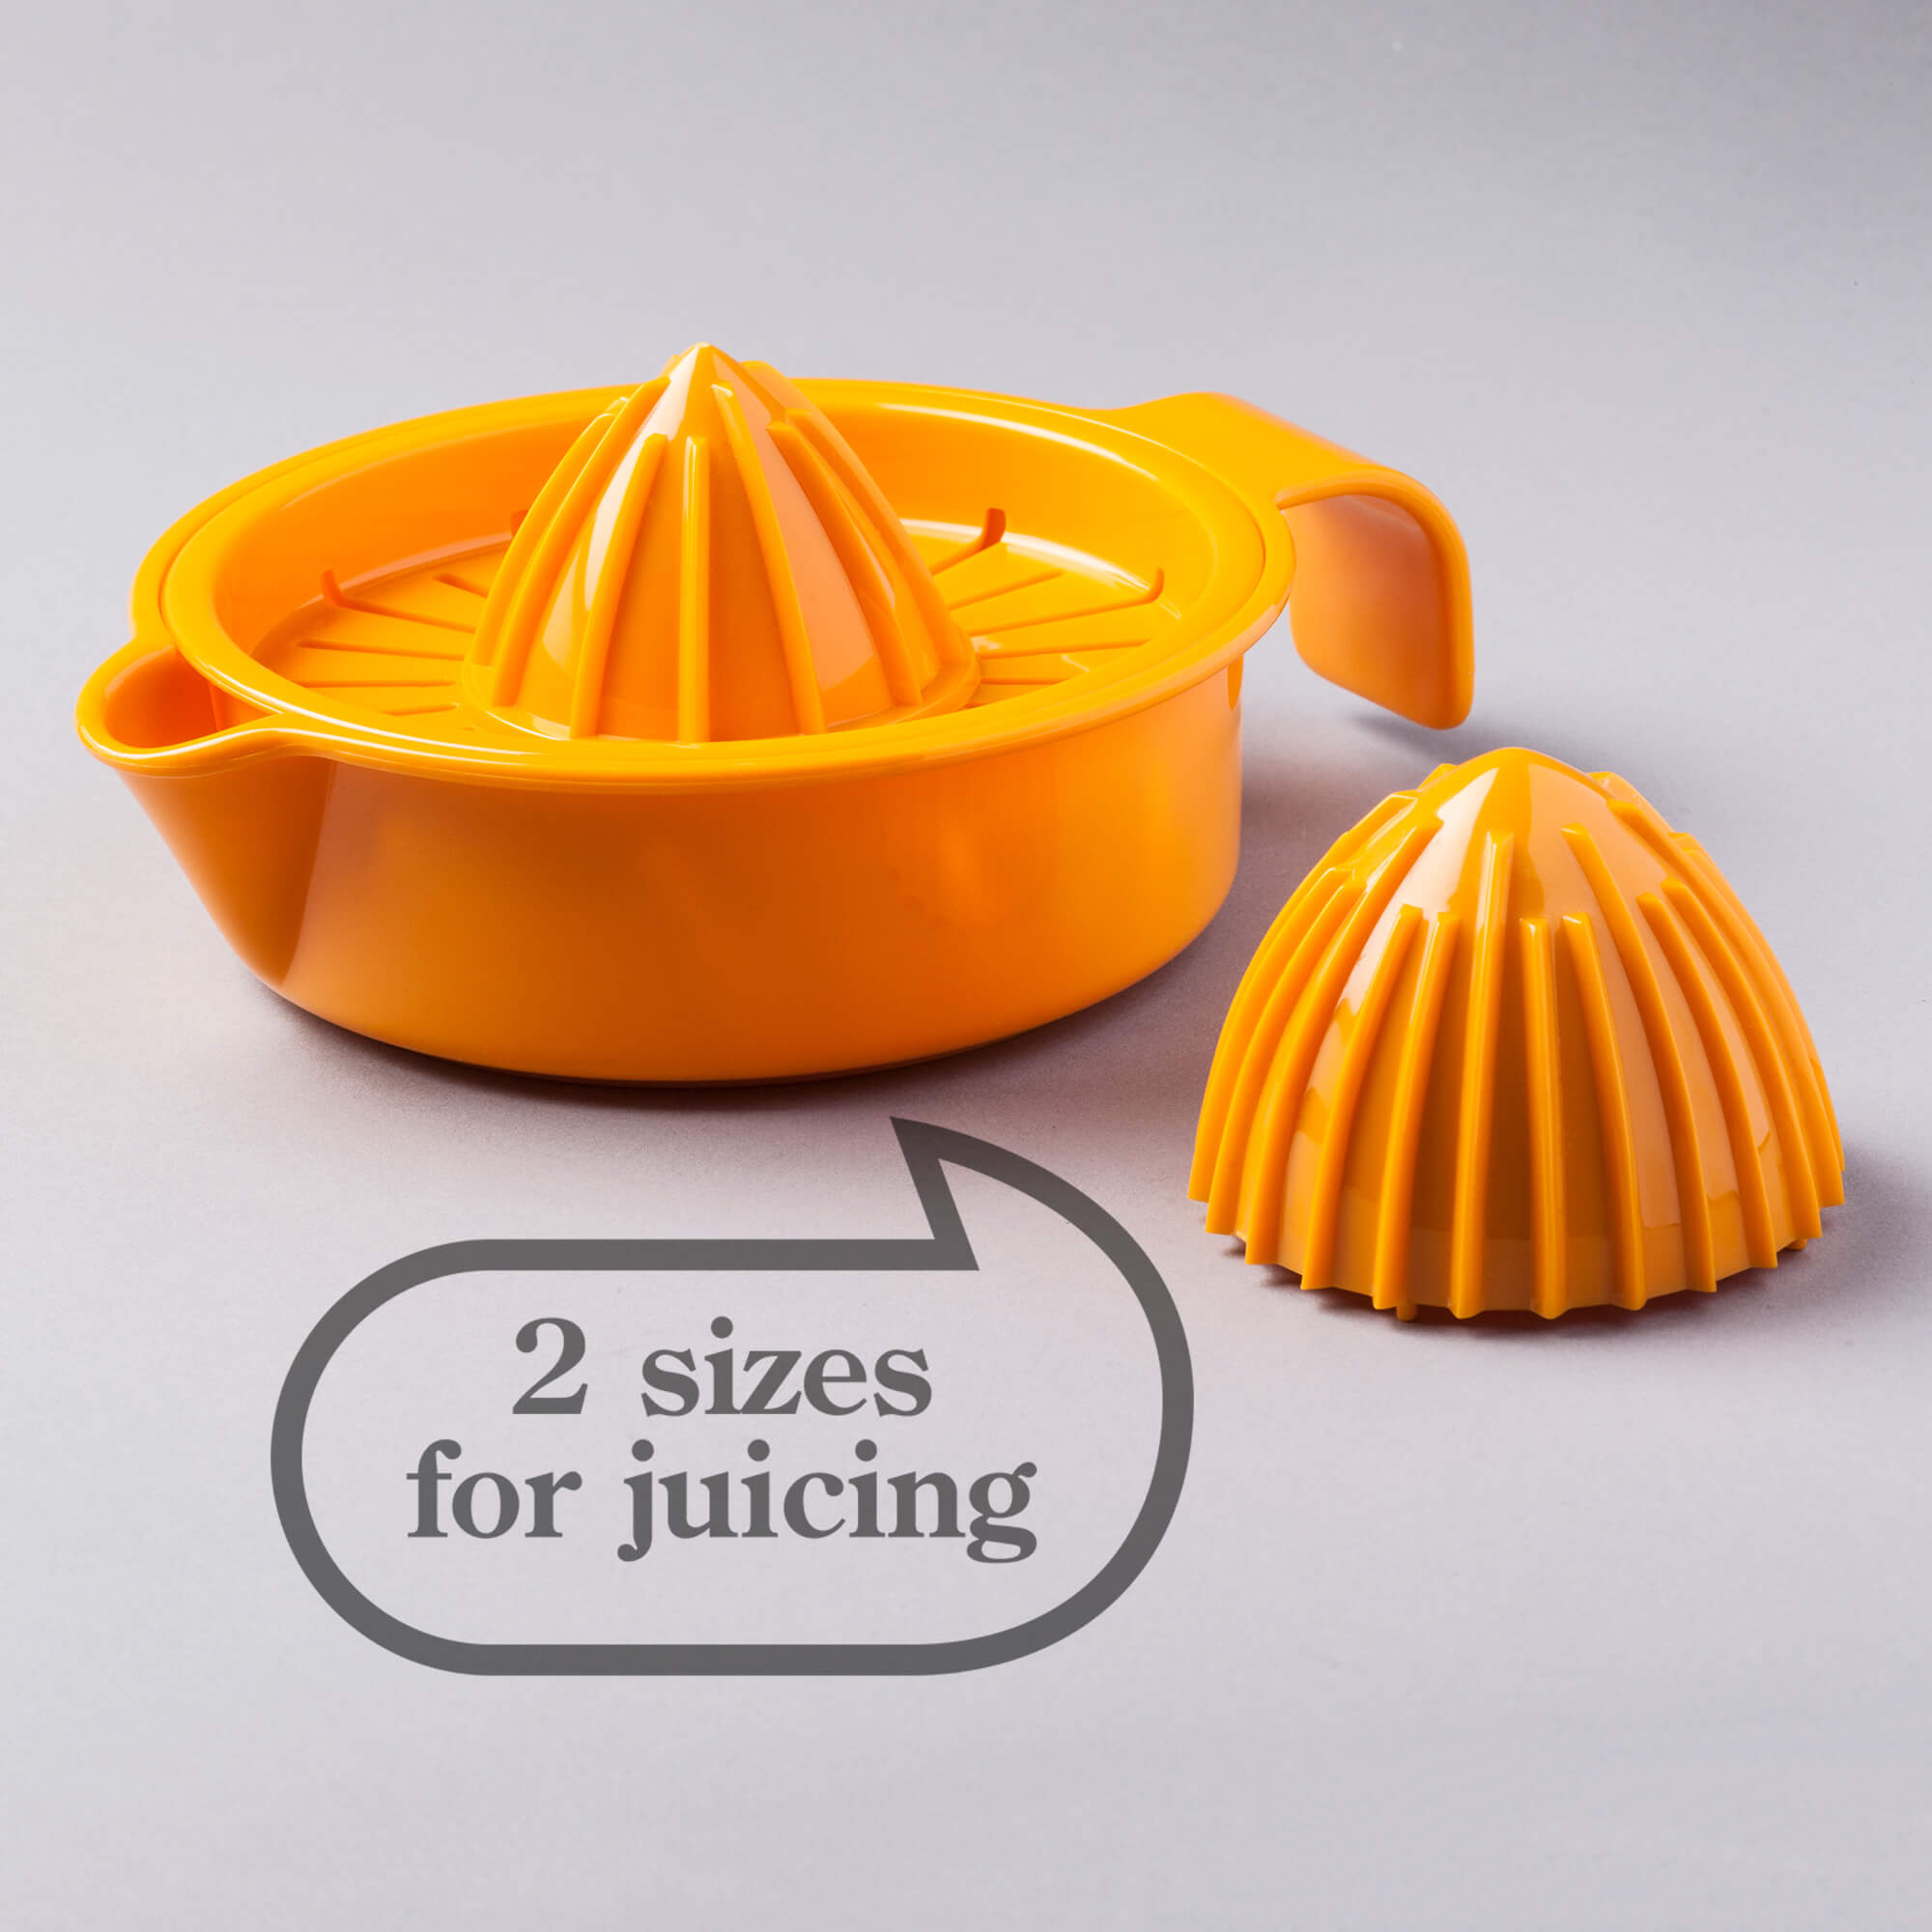 Zeal Easy Squeeze Juice Extractor with two different head sizes